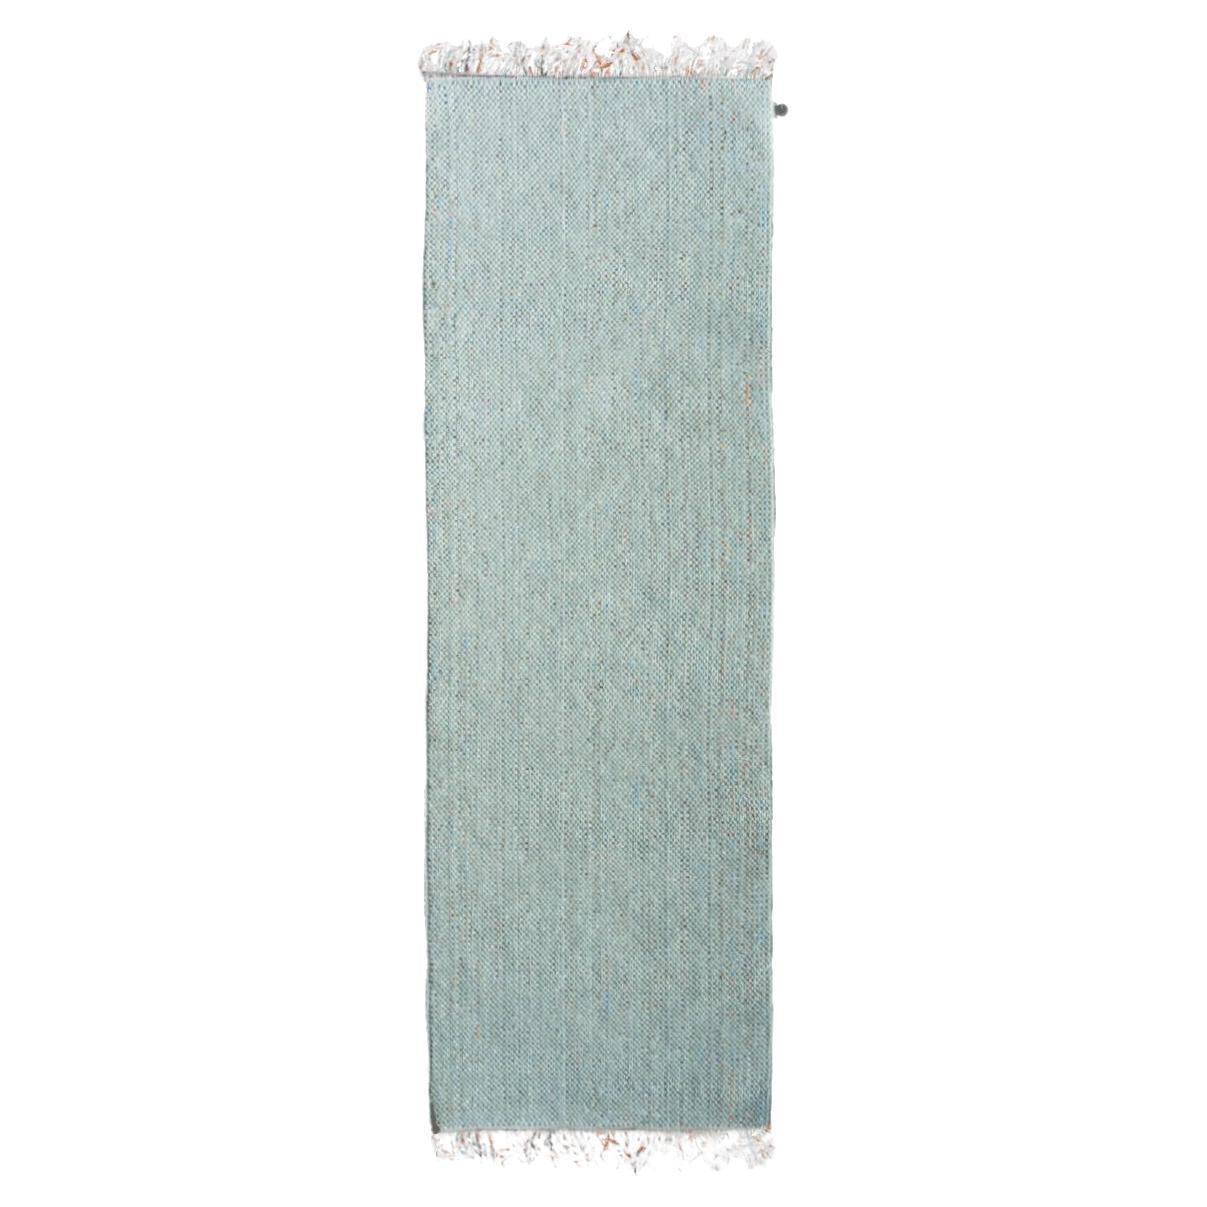 Candy Wrapper Rug_Runner_mint / Award Winning Woven Rug by Jutta Werner For Sale